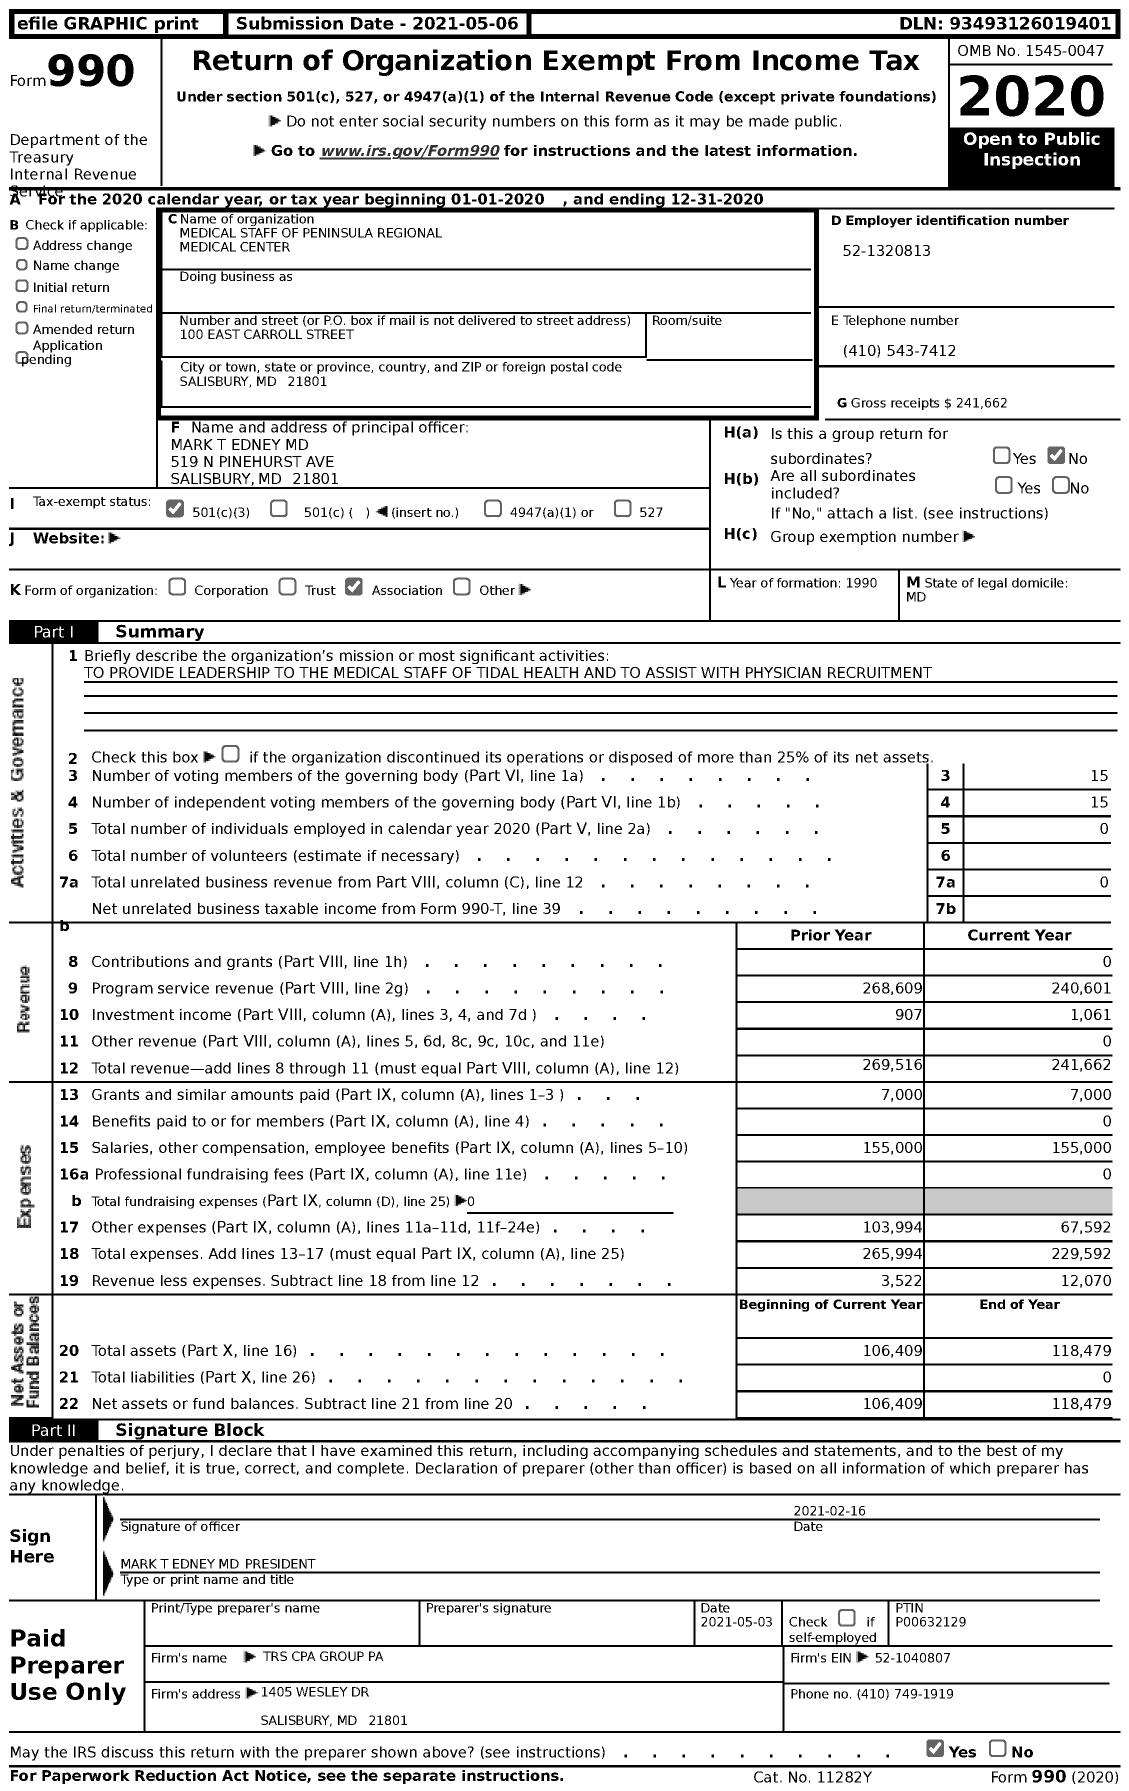 Image of first page of 2020 Form 990 for Medical Staff of Peninsula Regional Medical Center